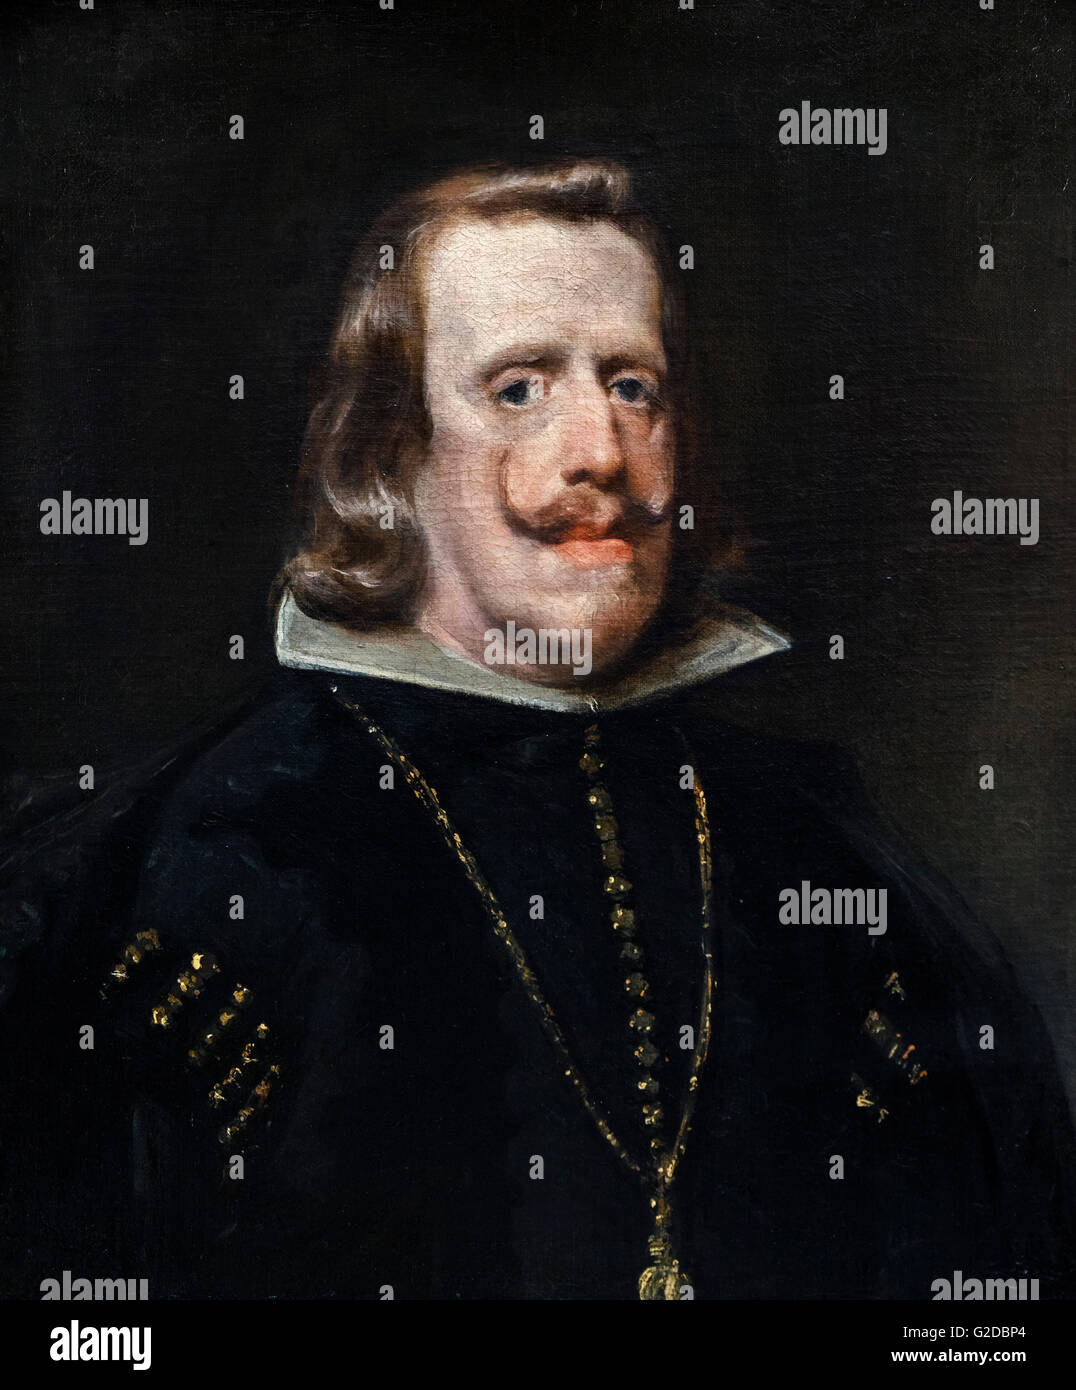 Philip IV of Spain (Felipe IV; 1605-1665), King of Spain and Portugal 1621 until his death (Portugal, until 1640), who reigned for most of the Thirty Years' War. Portrait by Diego Velázquez, oil on canvas, c.1656. Stock Photo